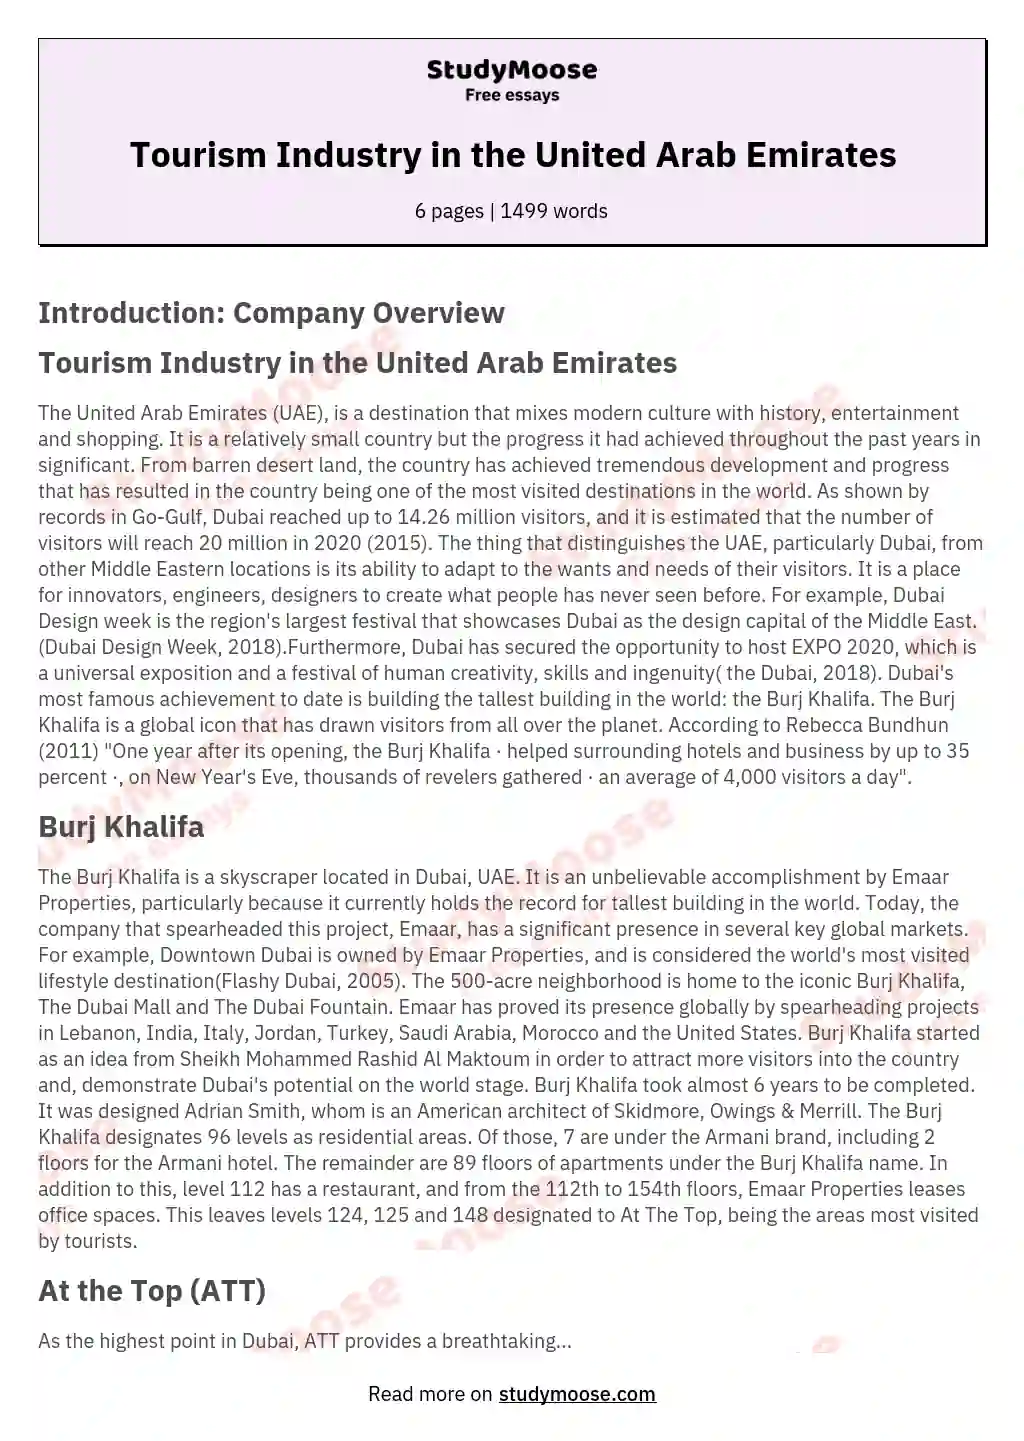 Tourism Industry in the United Arab Emirates essay